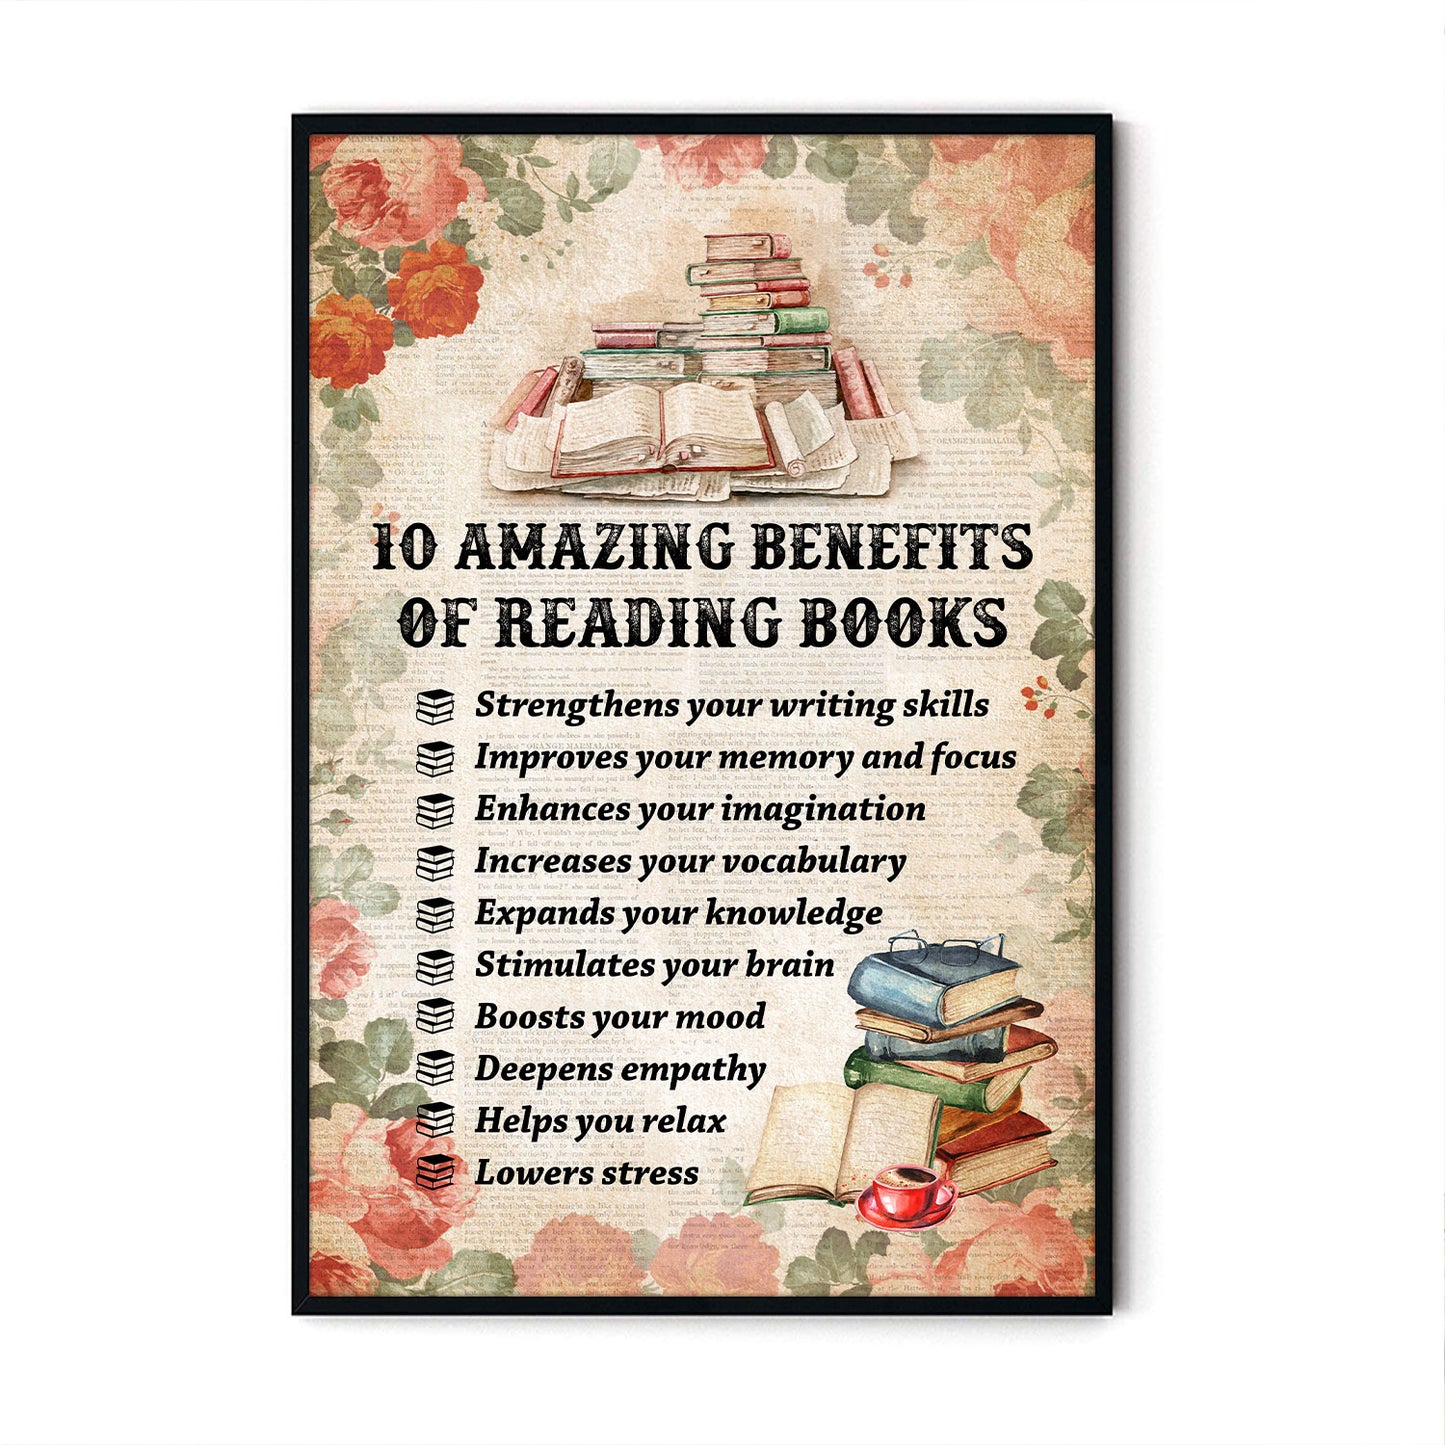 Book Benefits Of Reading Books - Personalizedwitch Poster For Bookworm